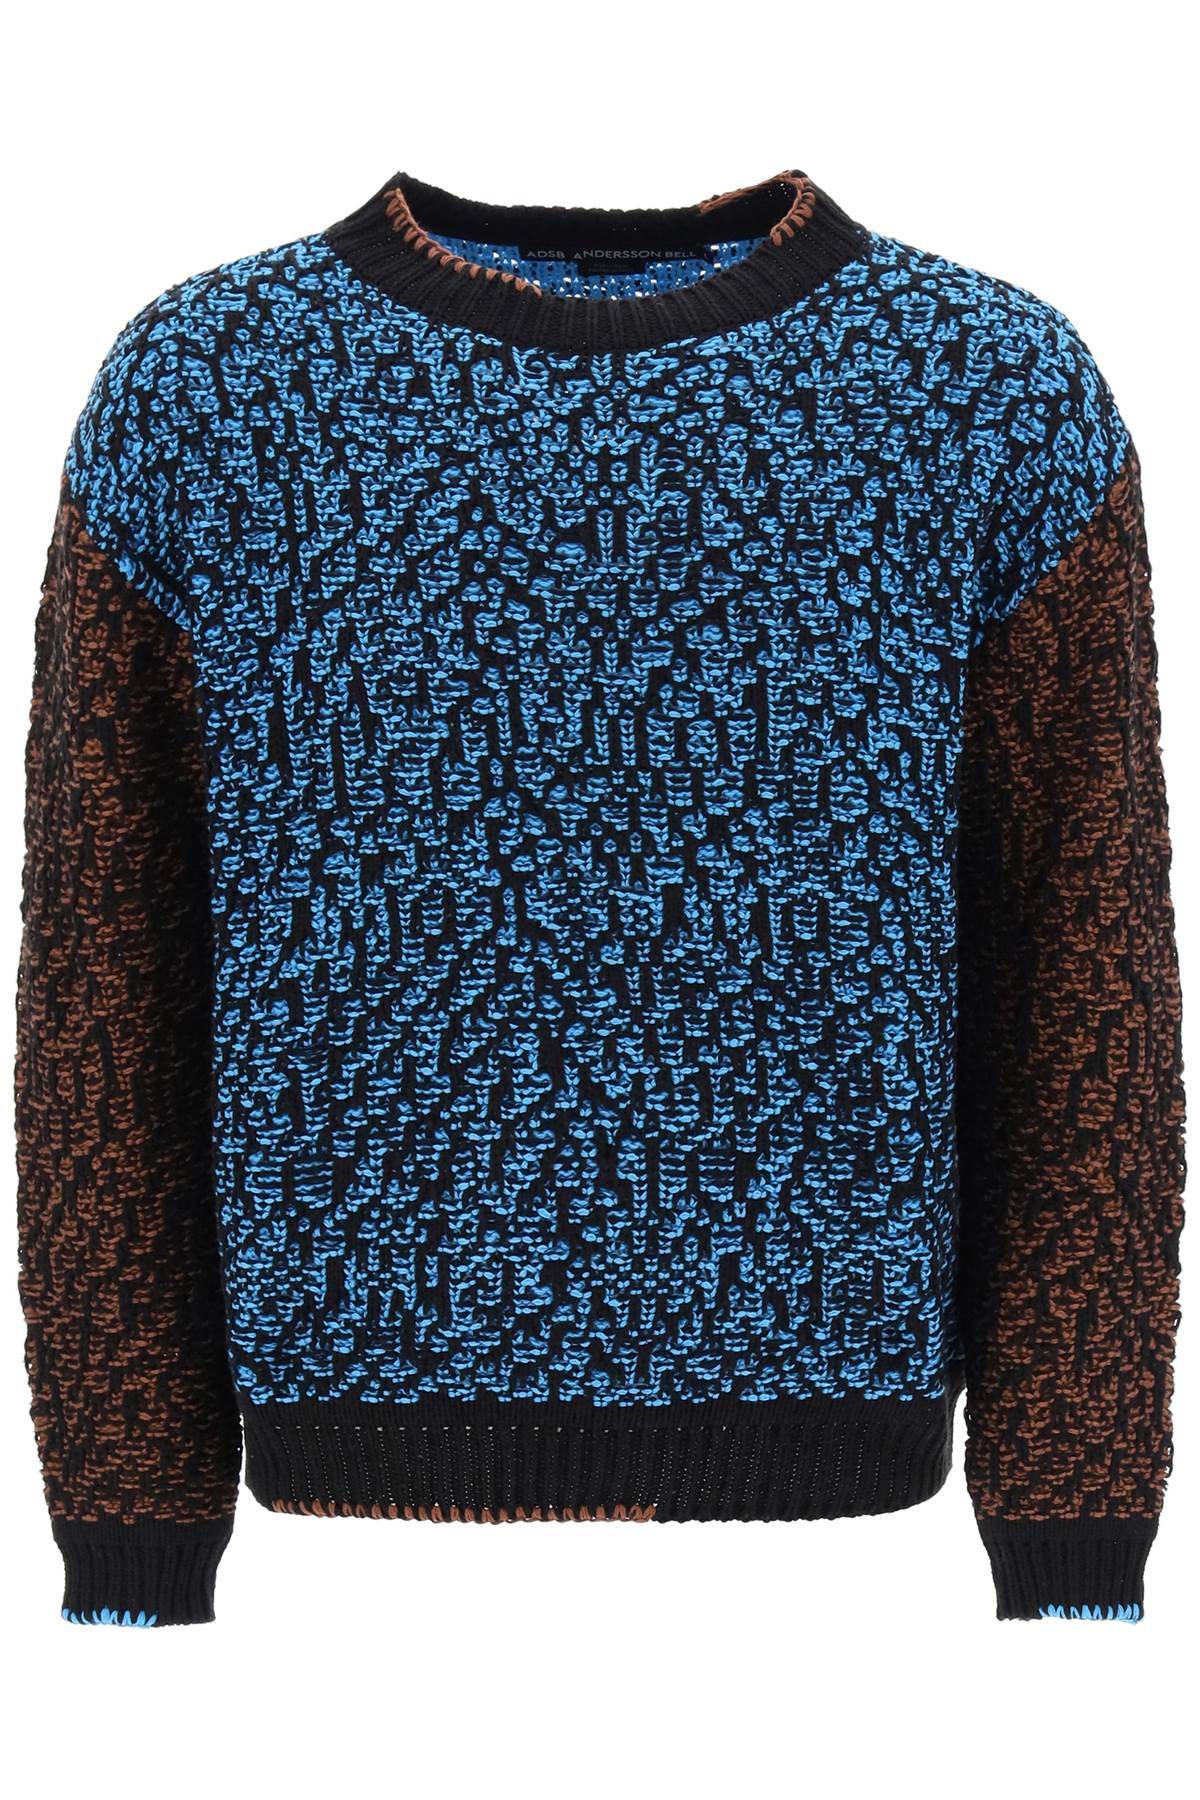 Andersson Bell ANDERSSON BELL multicolored net cotton blend sweater